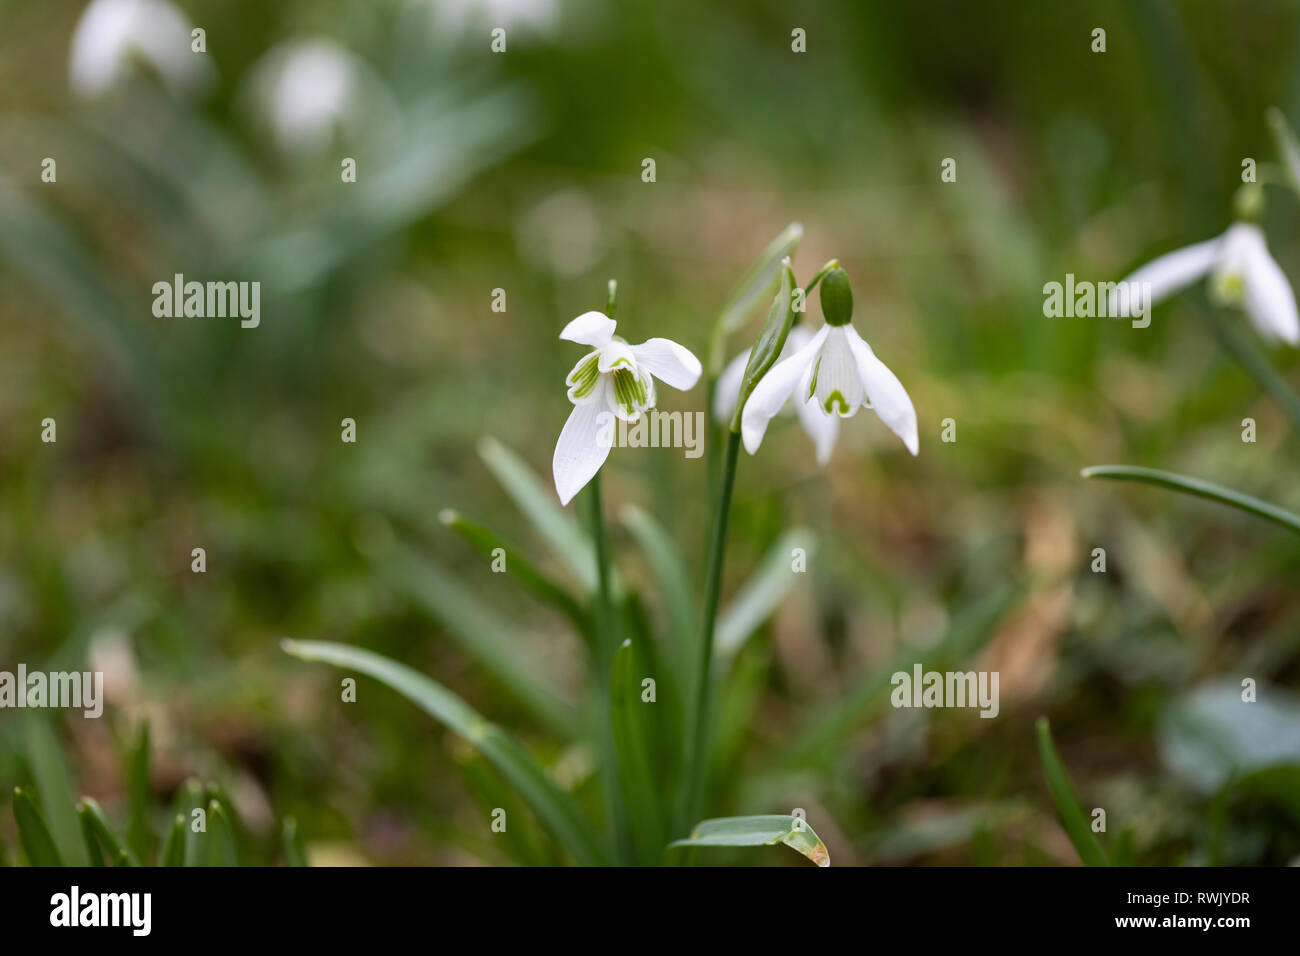 Close up of a snowdrop showing the smaller inner petals with green markings flowering in a spring garden, UK Stock Photo